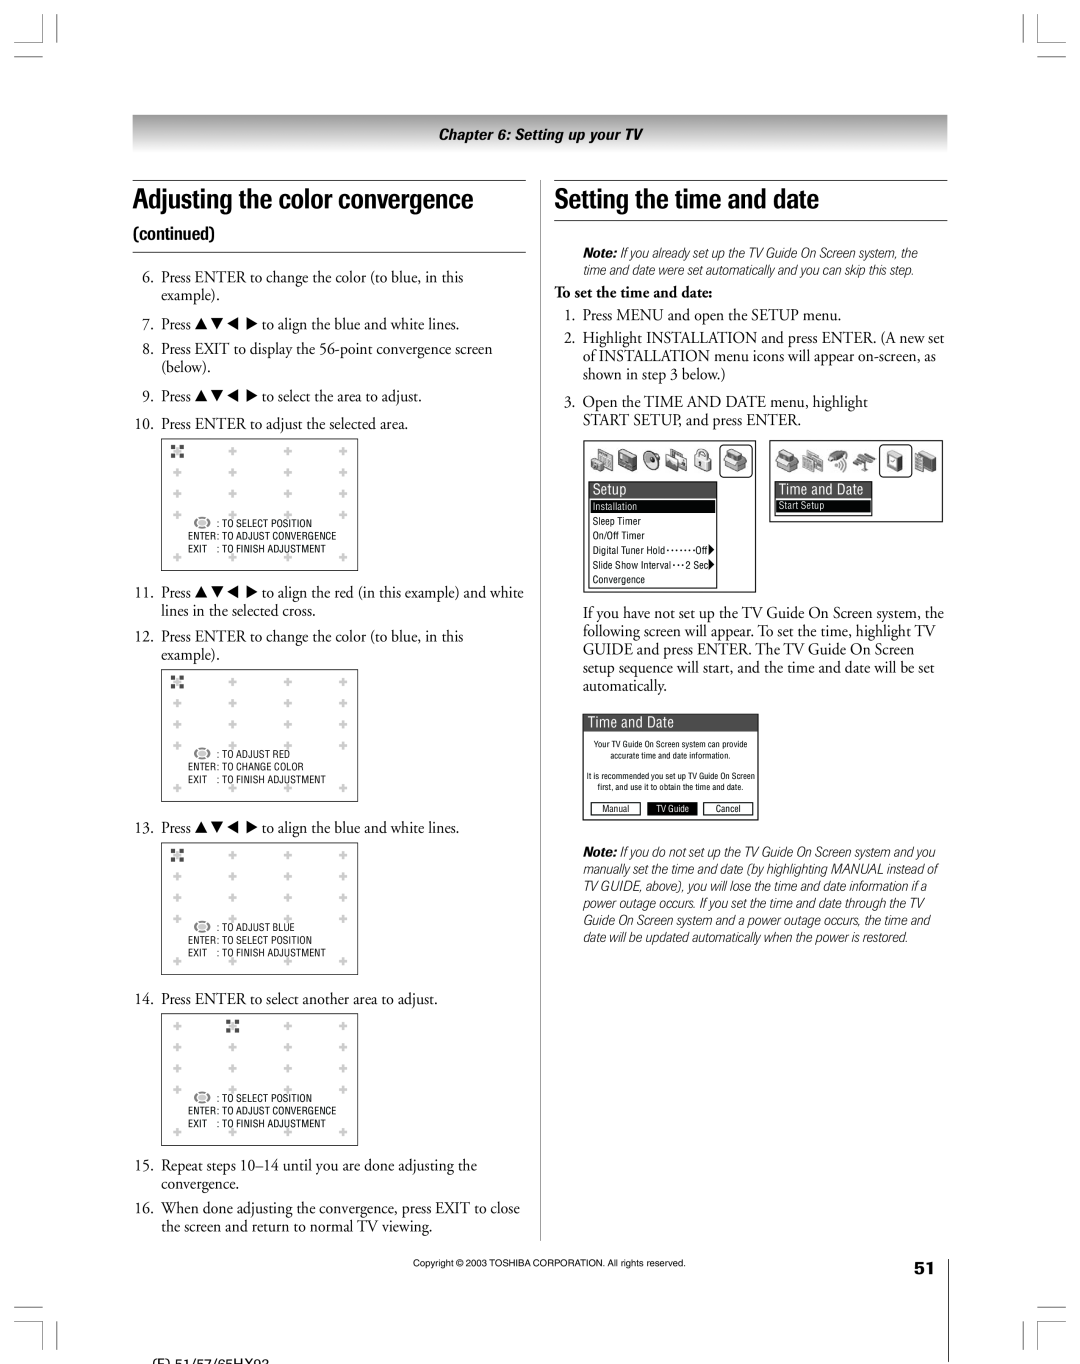 Toshiba 51HX93 owner manual Setting the time and date, Adjusting the color convergence, continued 